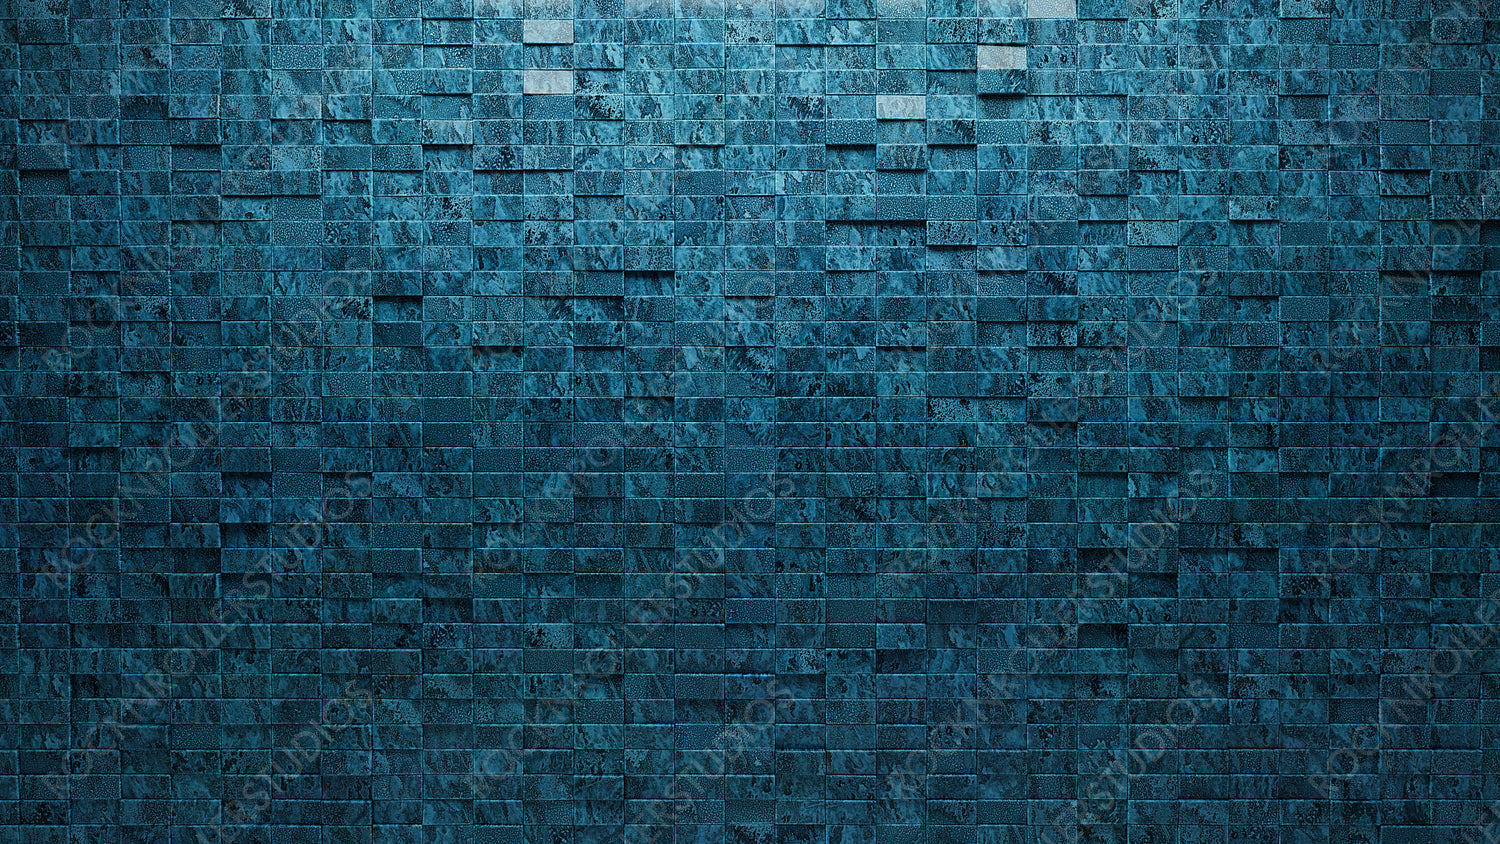 Blue Patina Tiles arranged to create a Textured wall. Rectangular, 3D Background formed from Glazed blocks. 3D Render